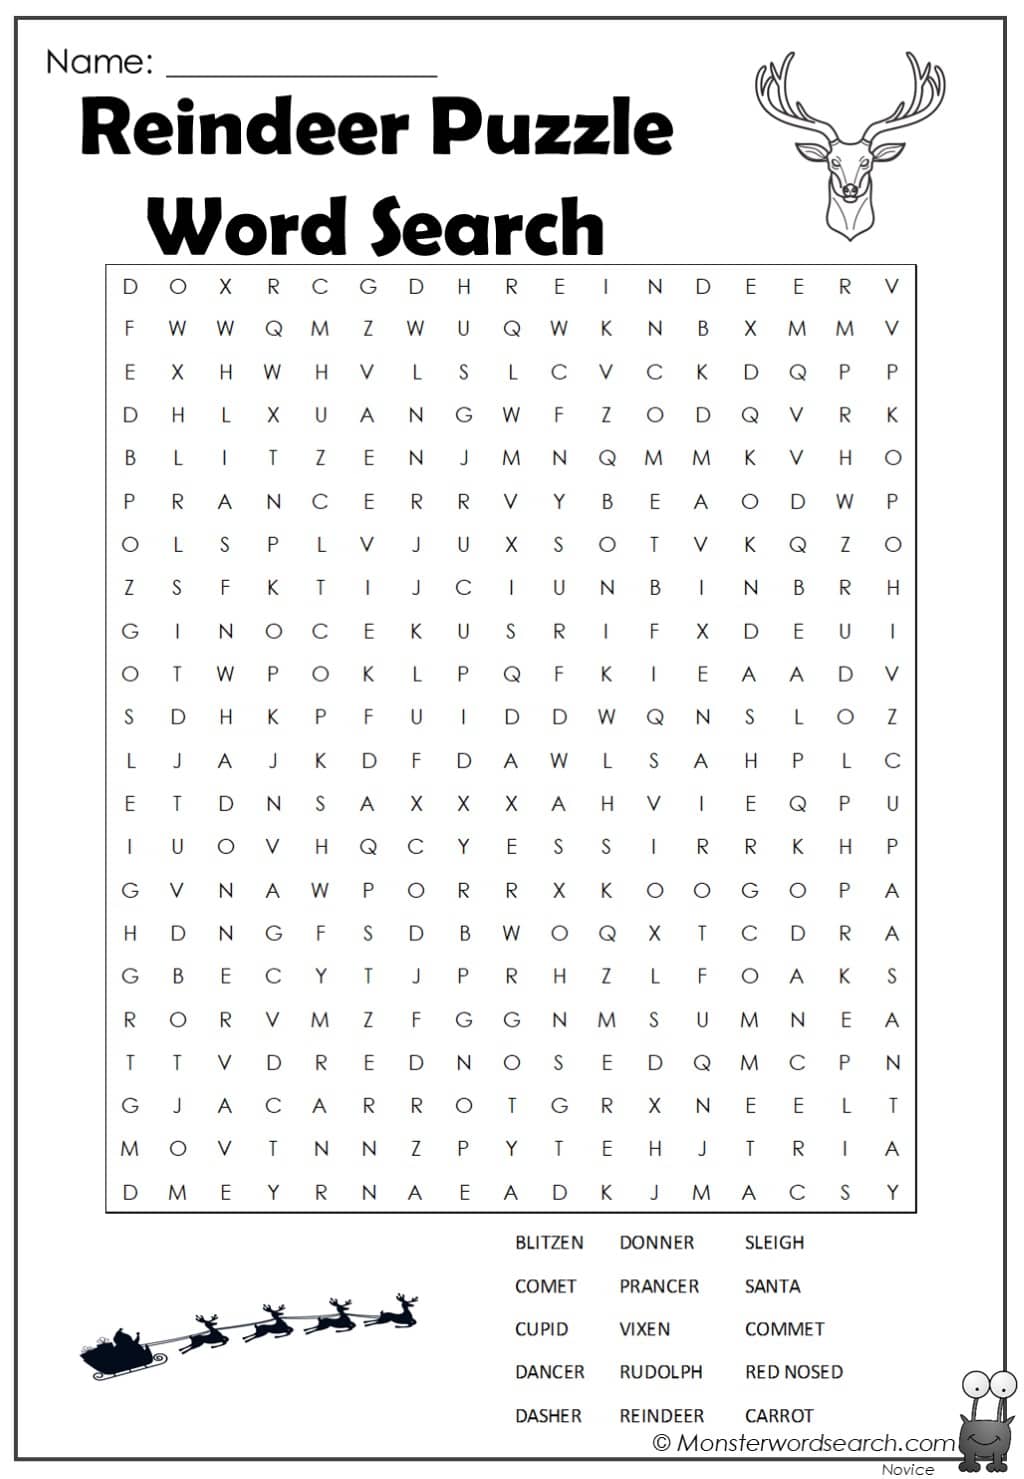 Reindeer Puzzle Word Search